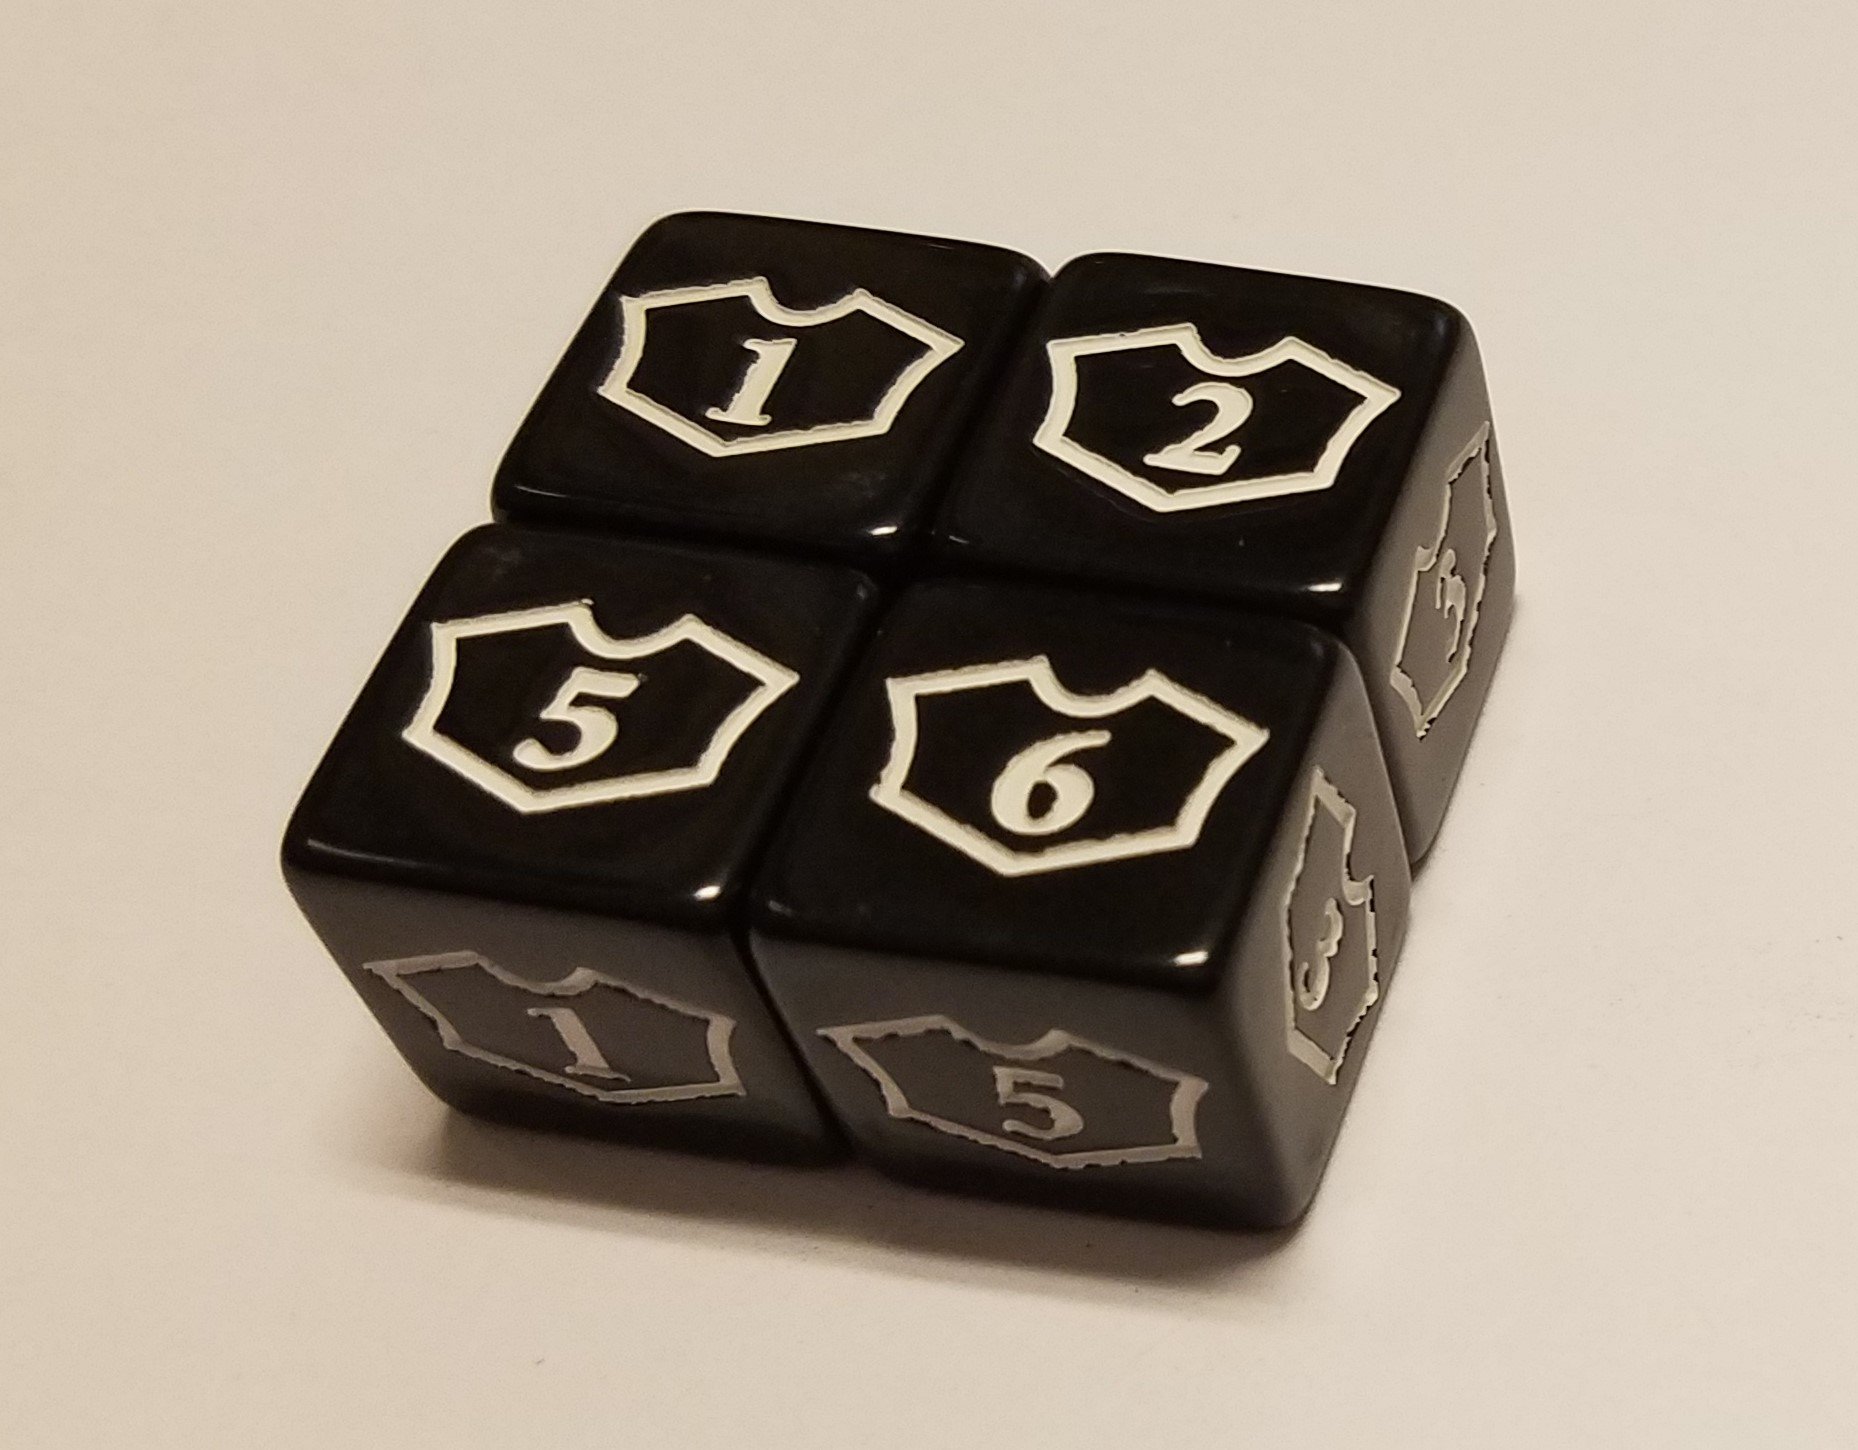 18x Counter, Tarmogoyf & Loyalty Dice for Magic: The Gathering and Other Games/CCG MTG